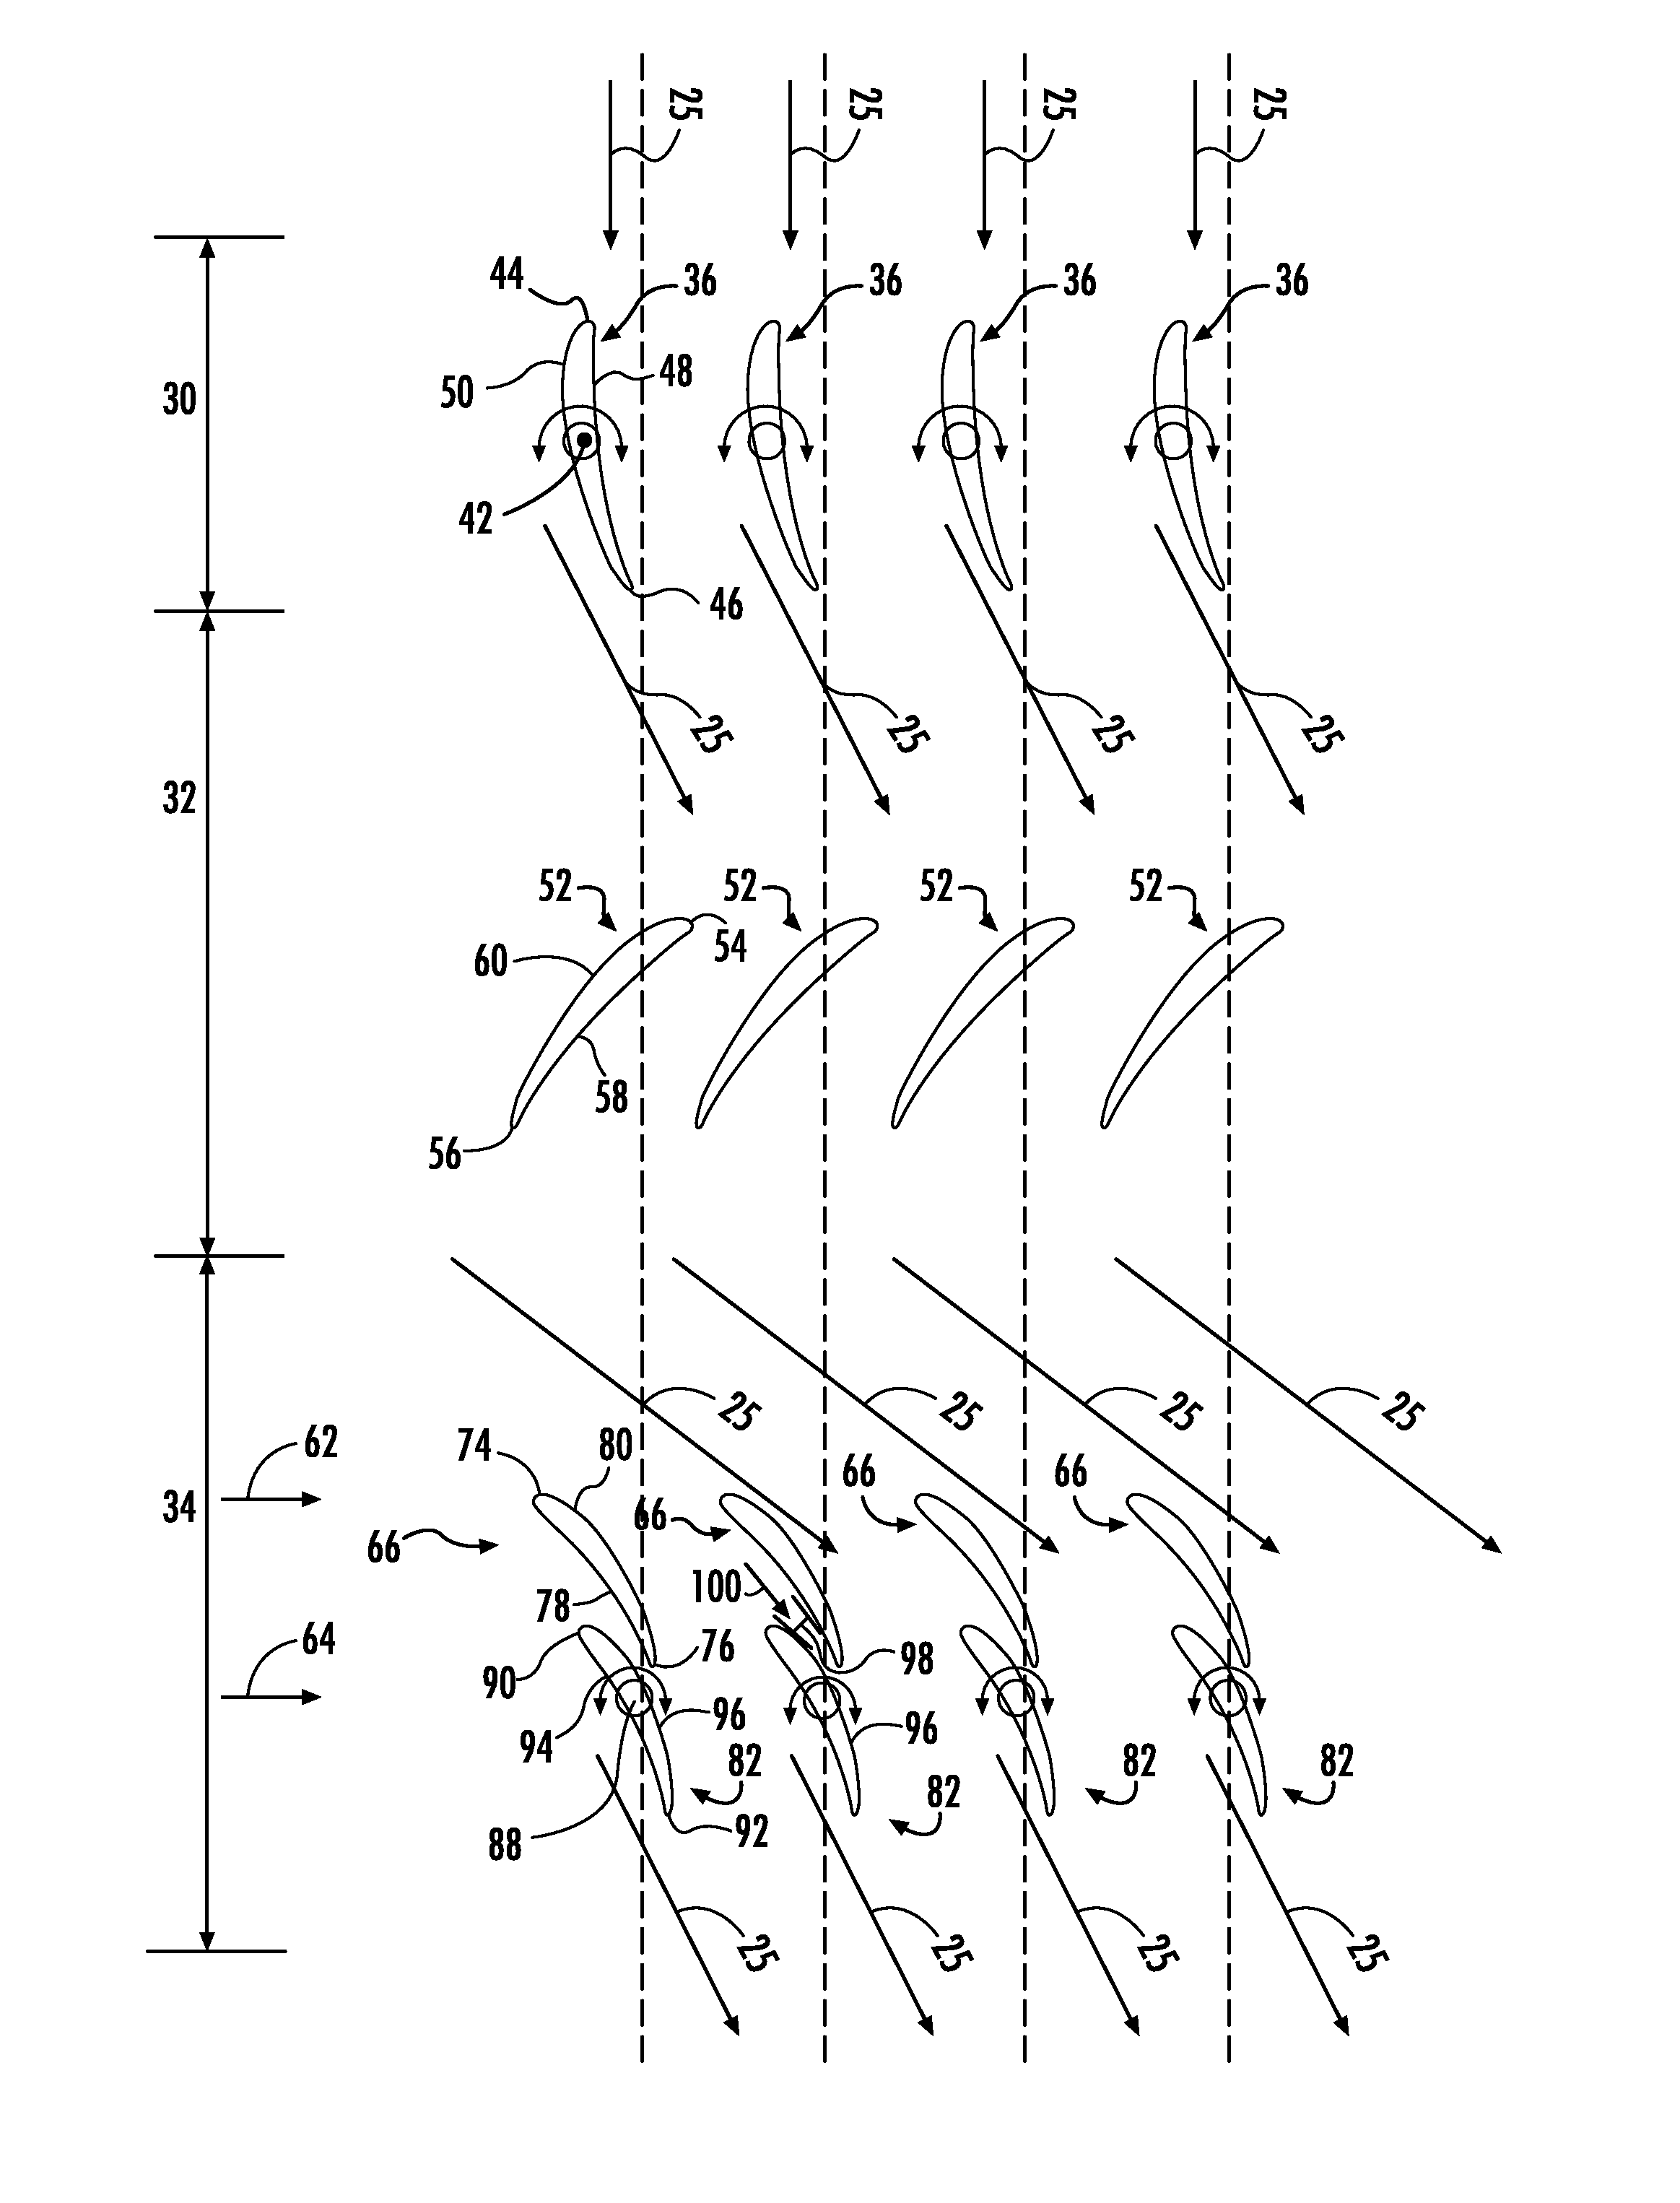 System and method for improving gas turbine performance at part-load operation